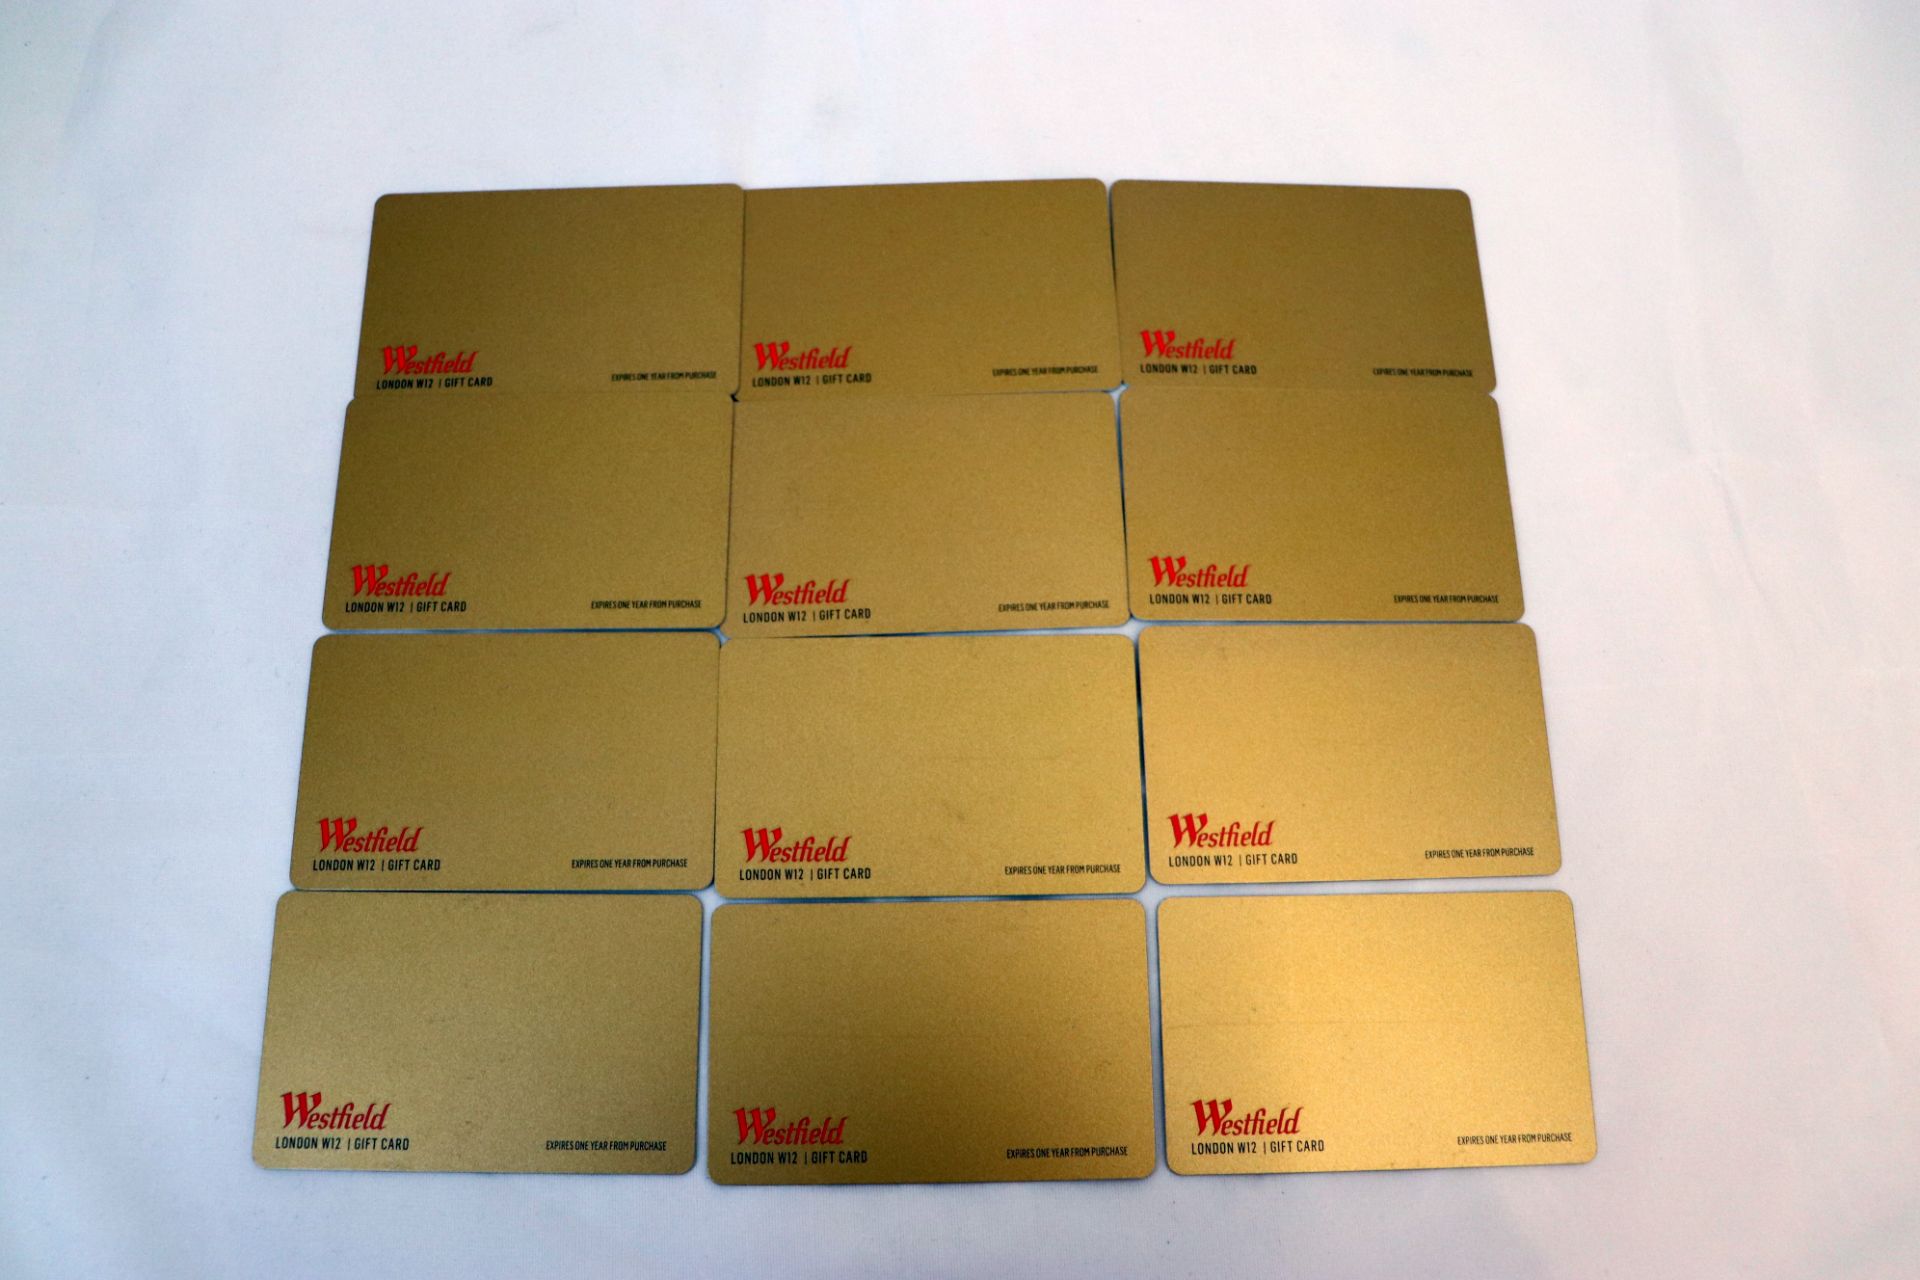 £300 Westfield London Shopping Centre Gift Cards, Expiry Date Believed to be 3rd March 2021 (NO